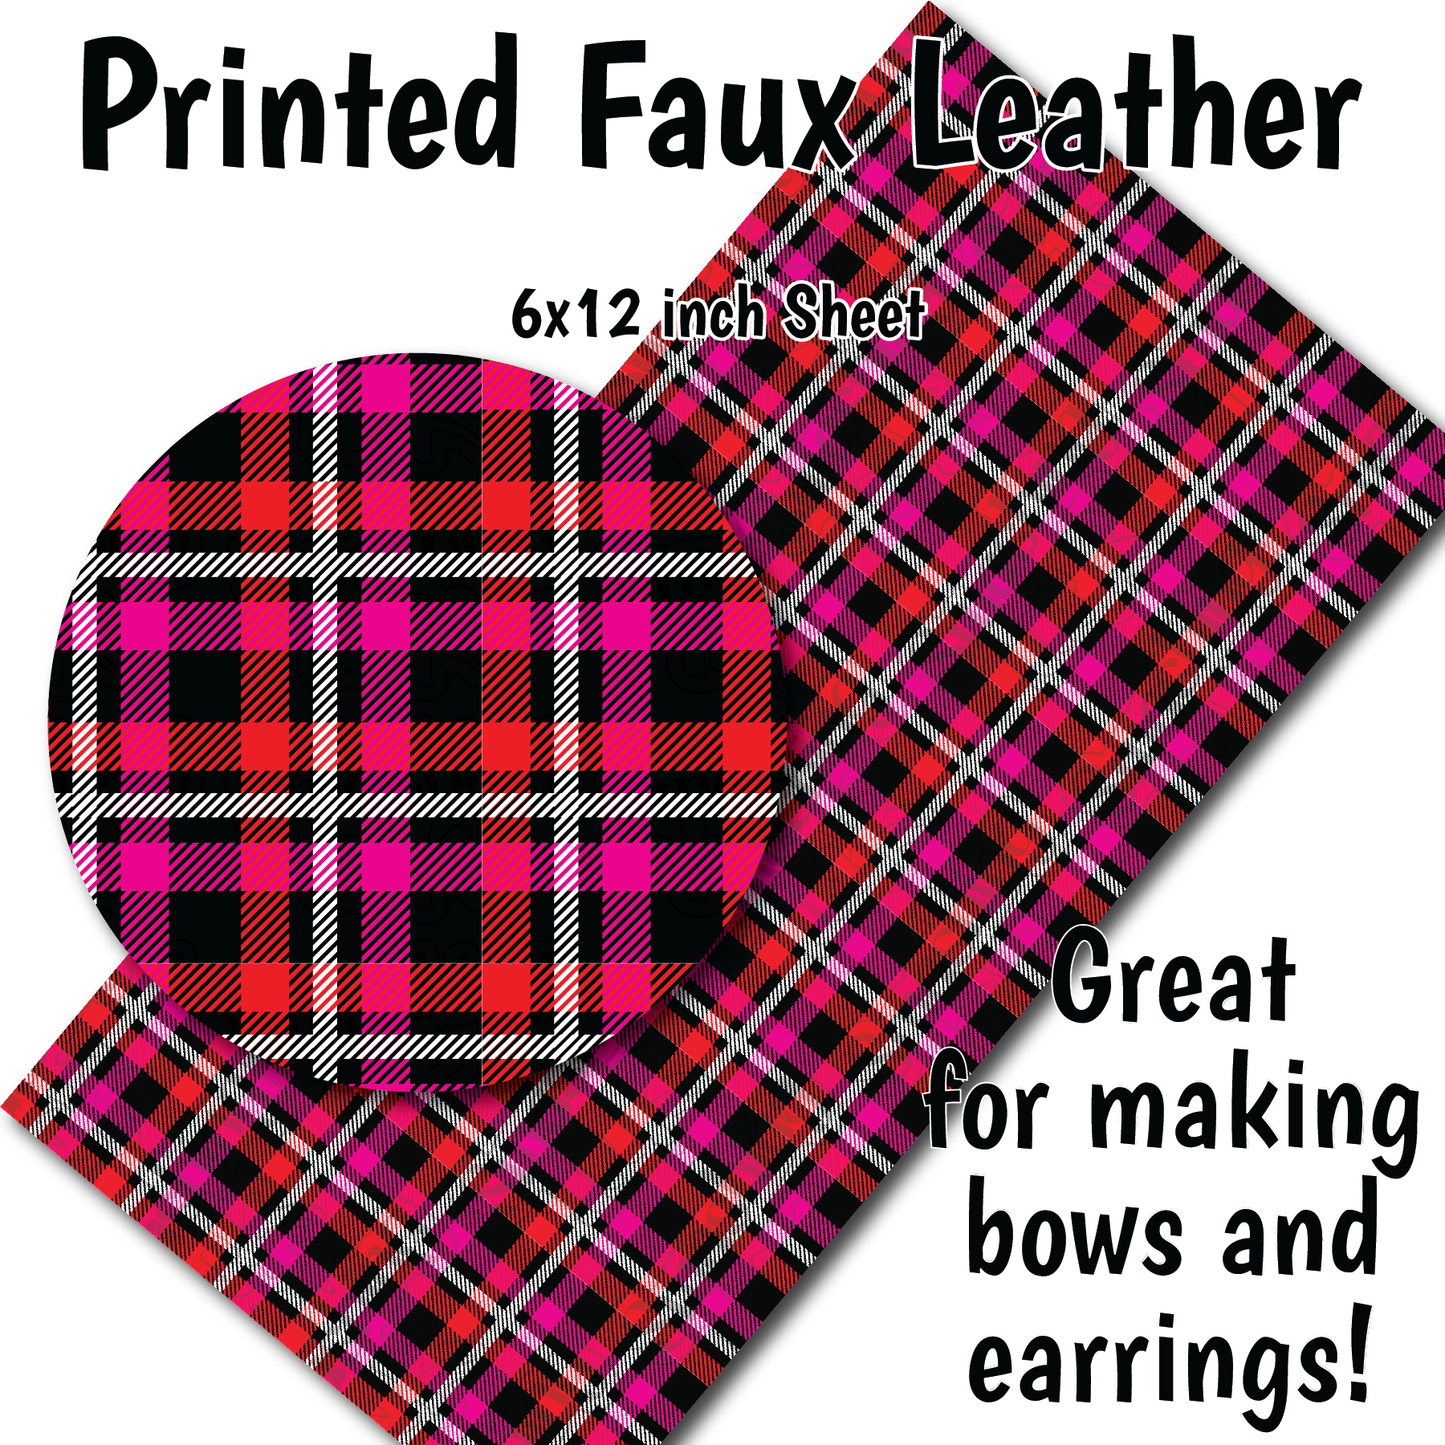 Valentine's Plaid - Faux Leather Sheet (SHIPS IN 3 BUS DAYS)